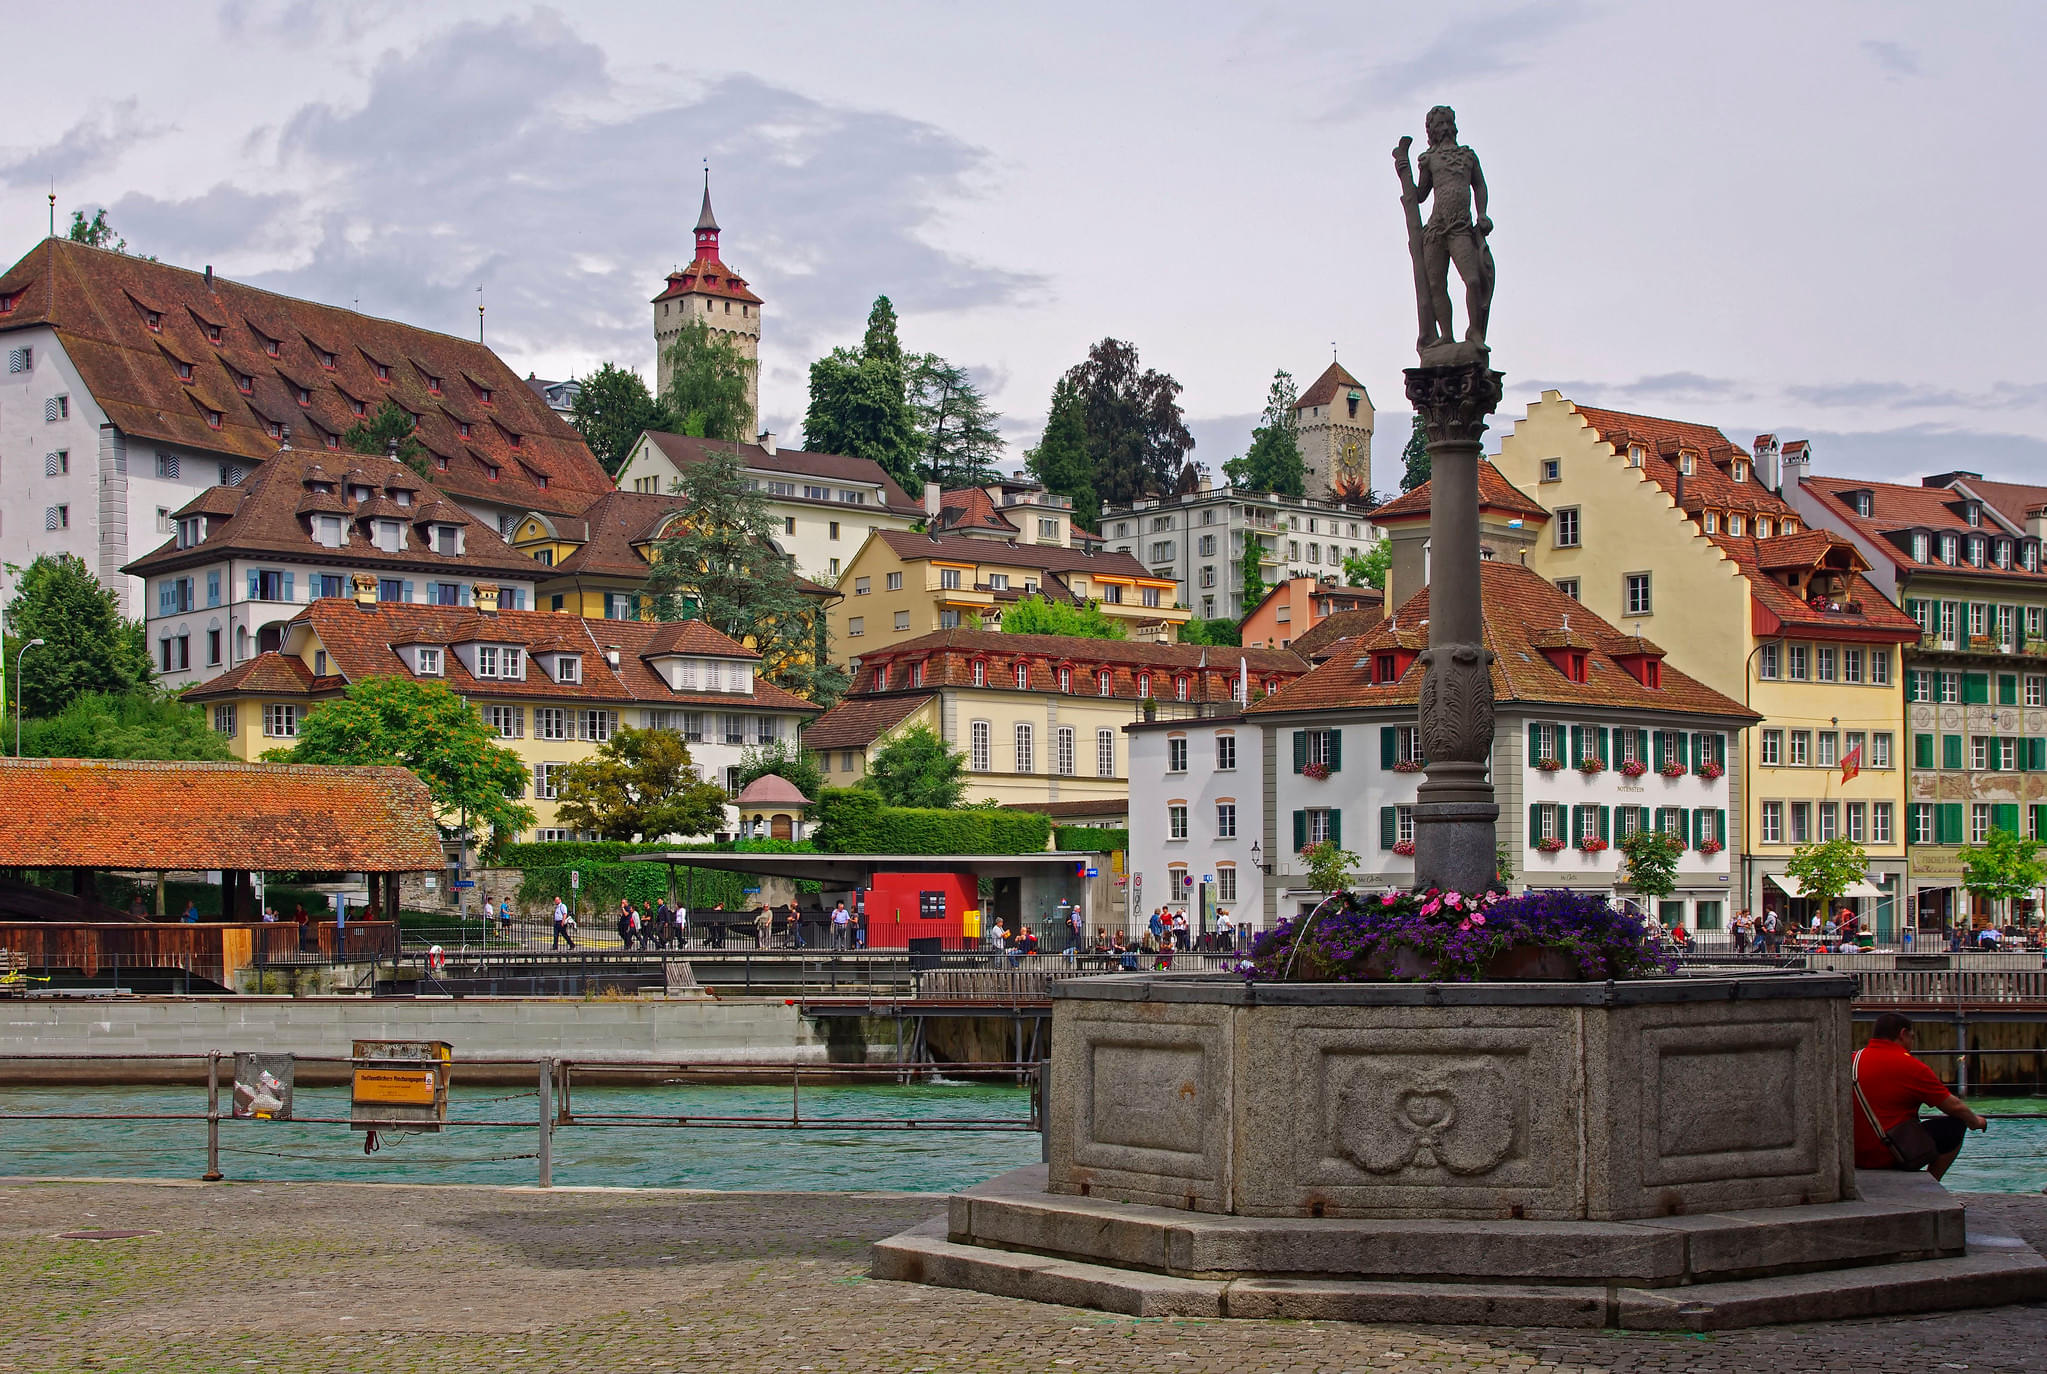 Explore the Old Town of Lucerne